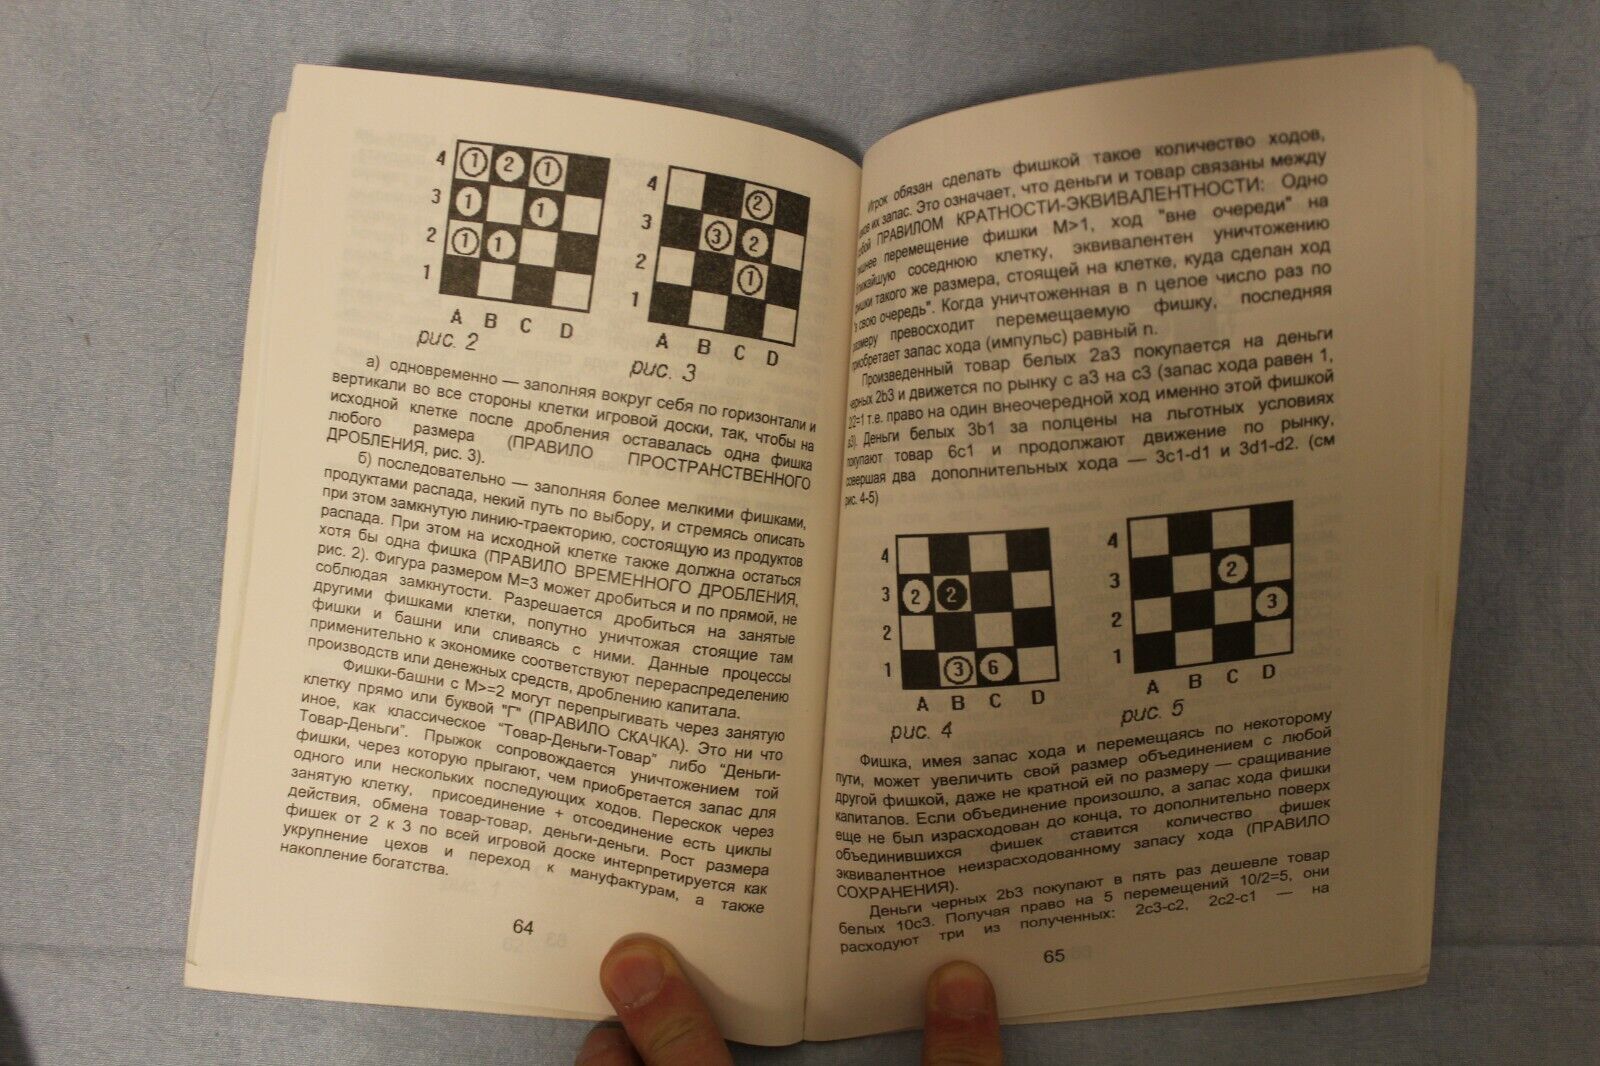 11430.Russian Book Signed by Gavrilov, Latypov. Old & New Columnar Chess. 1998